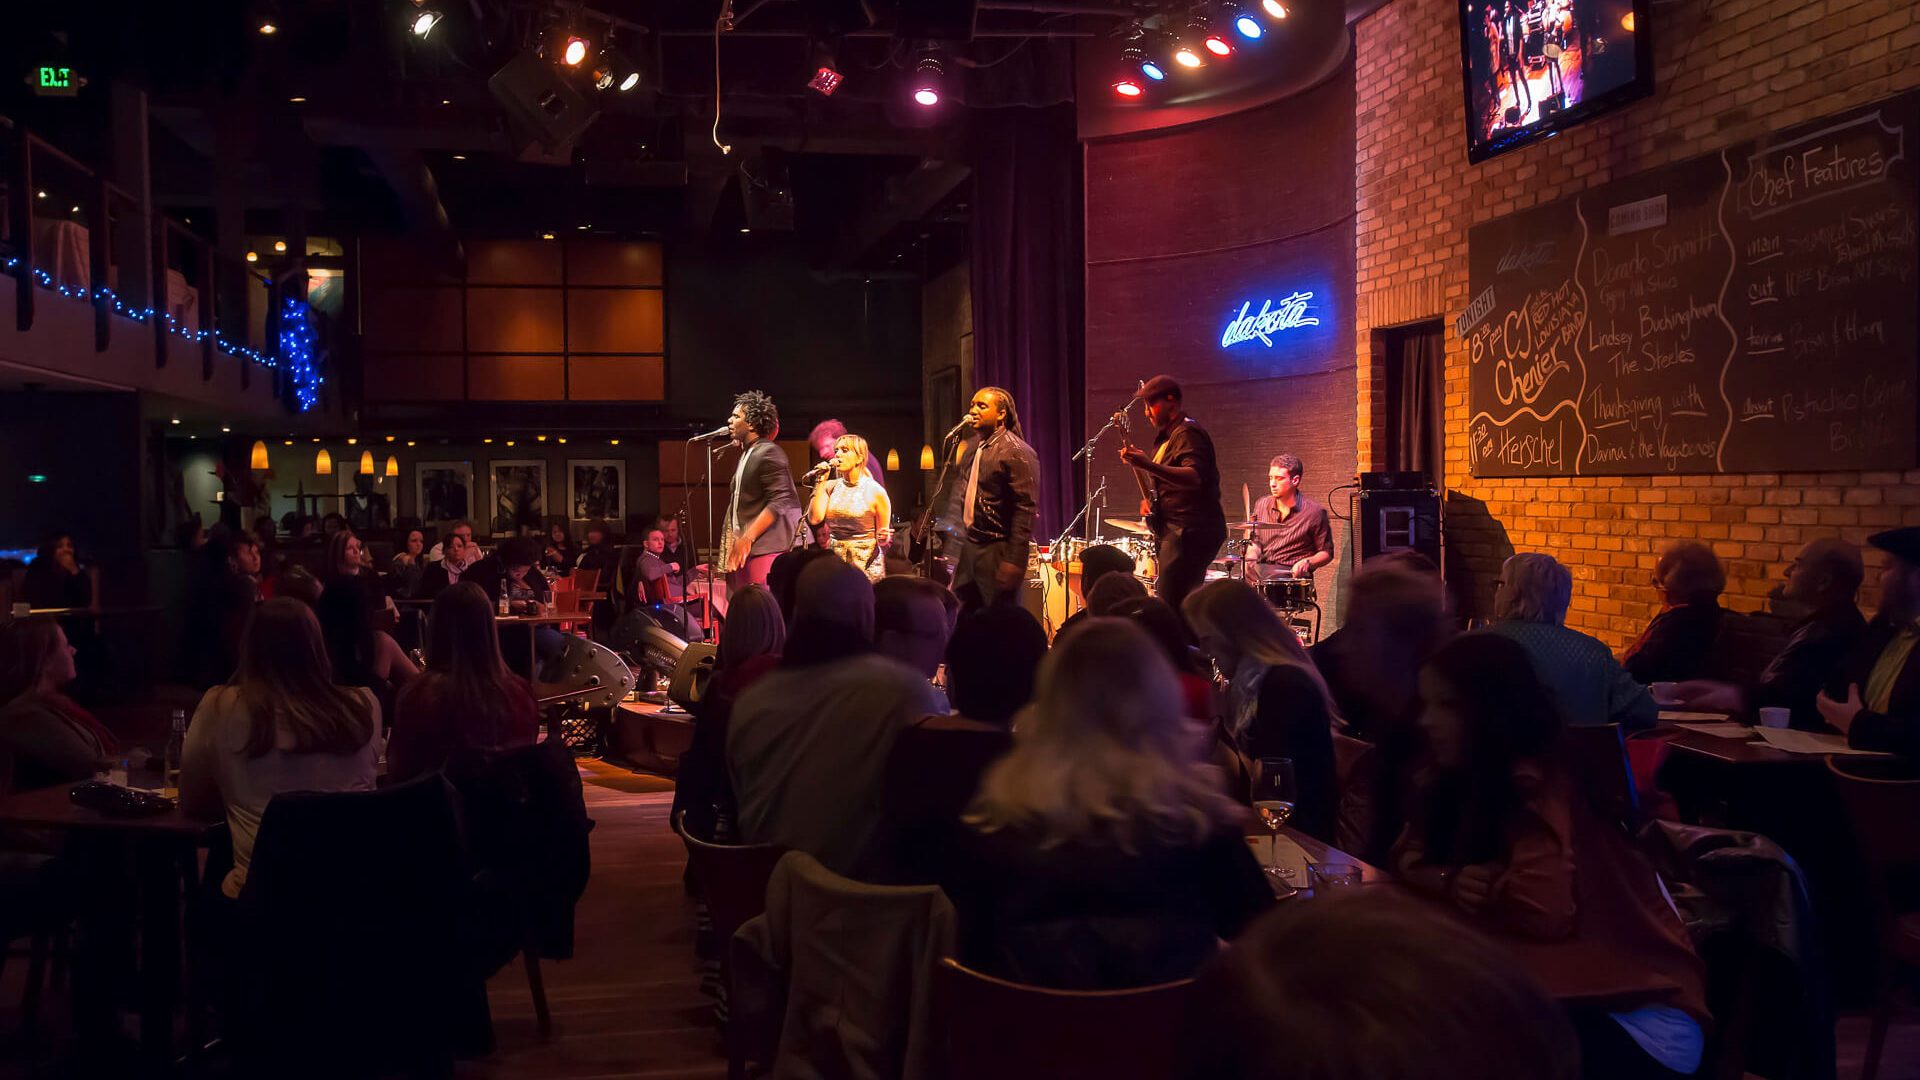 Jazz & blues hotspots in the Twin Cities River Country